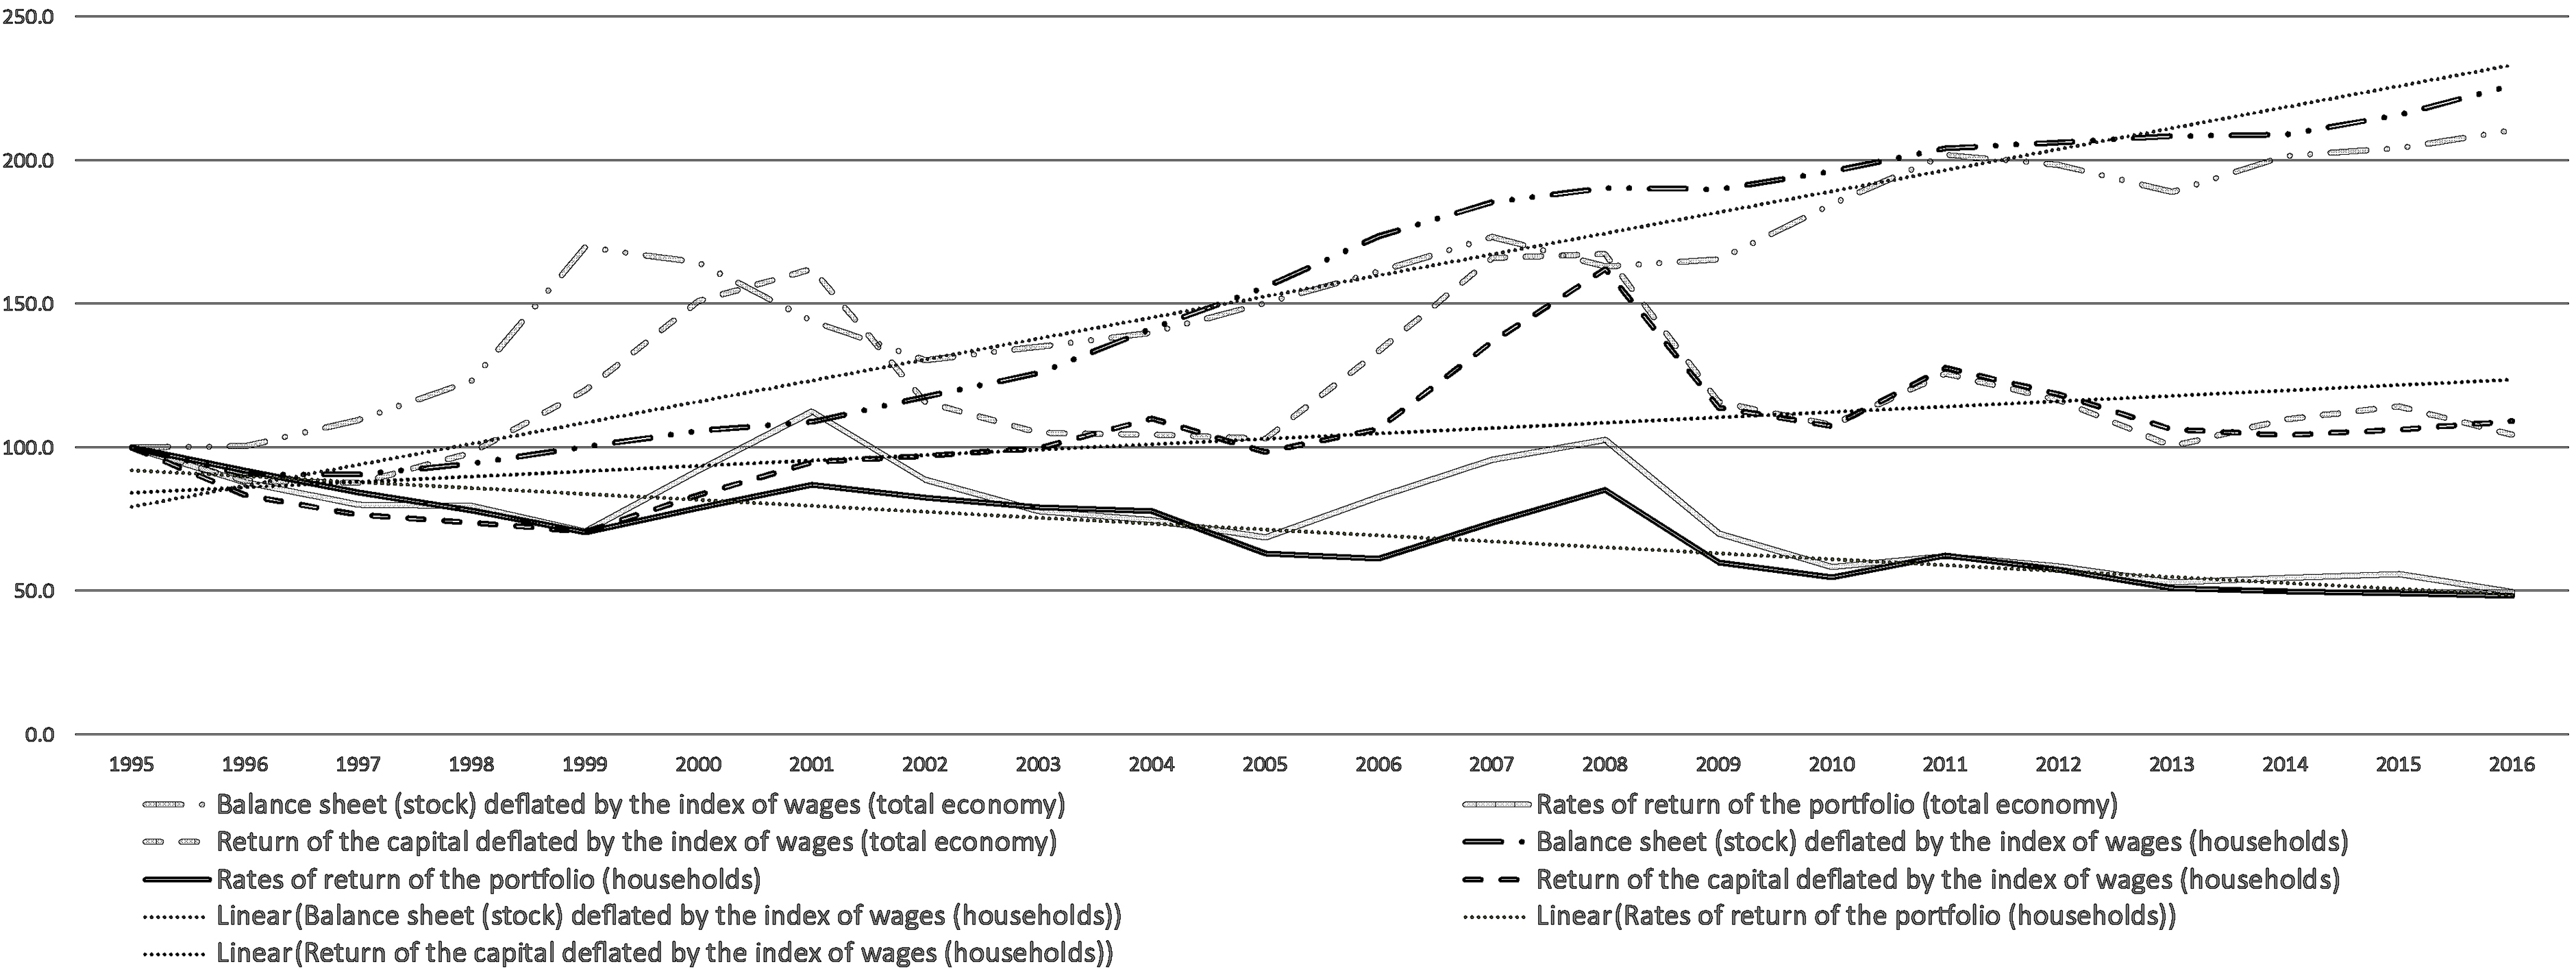 Financial stock and return of capital corrected by the index of wages and salaries as well as rates of return for the total domestic economy and households, 1995 = 100.